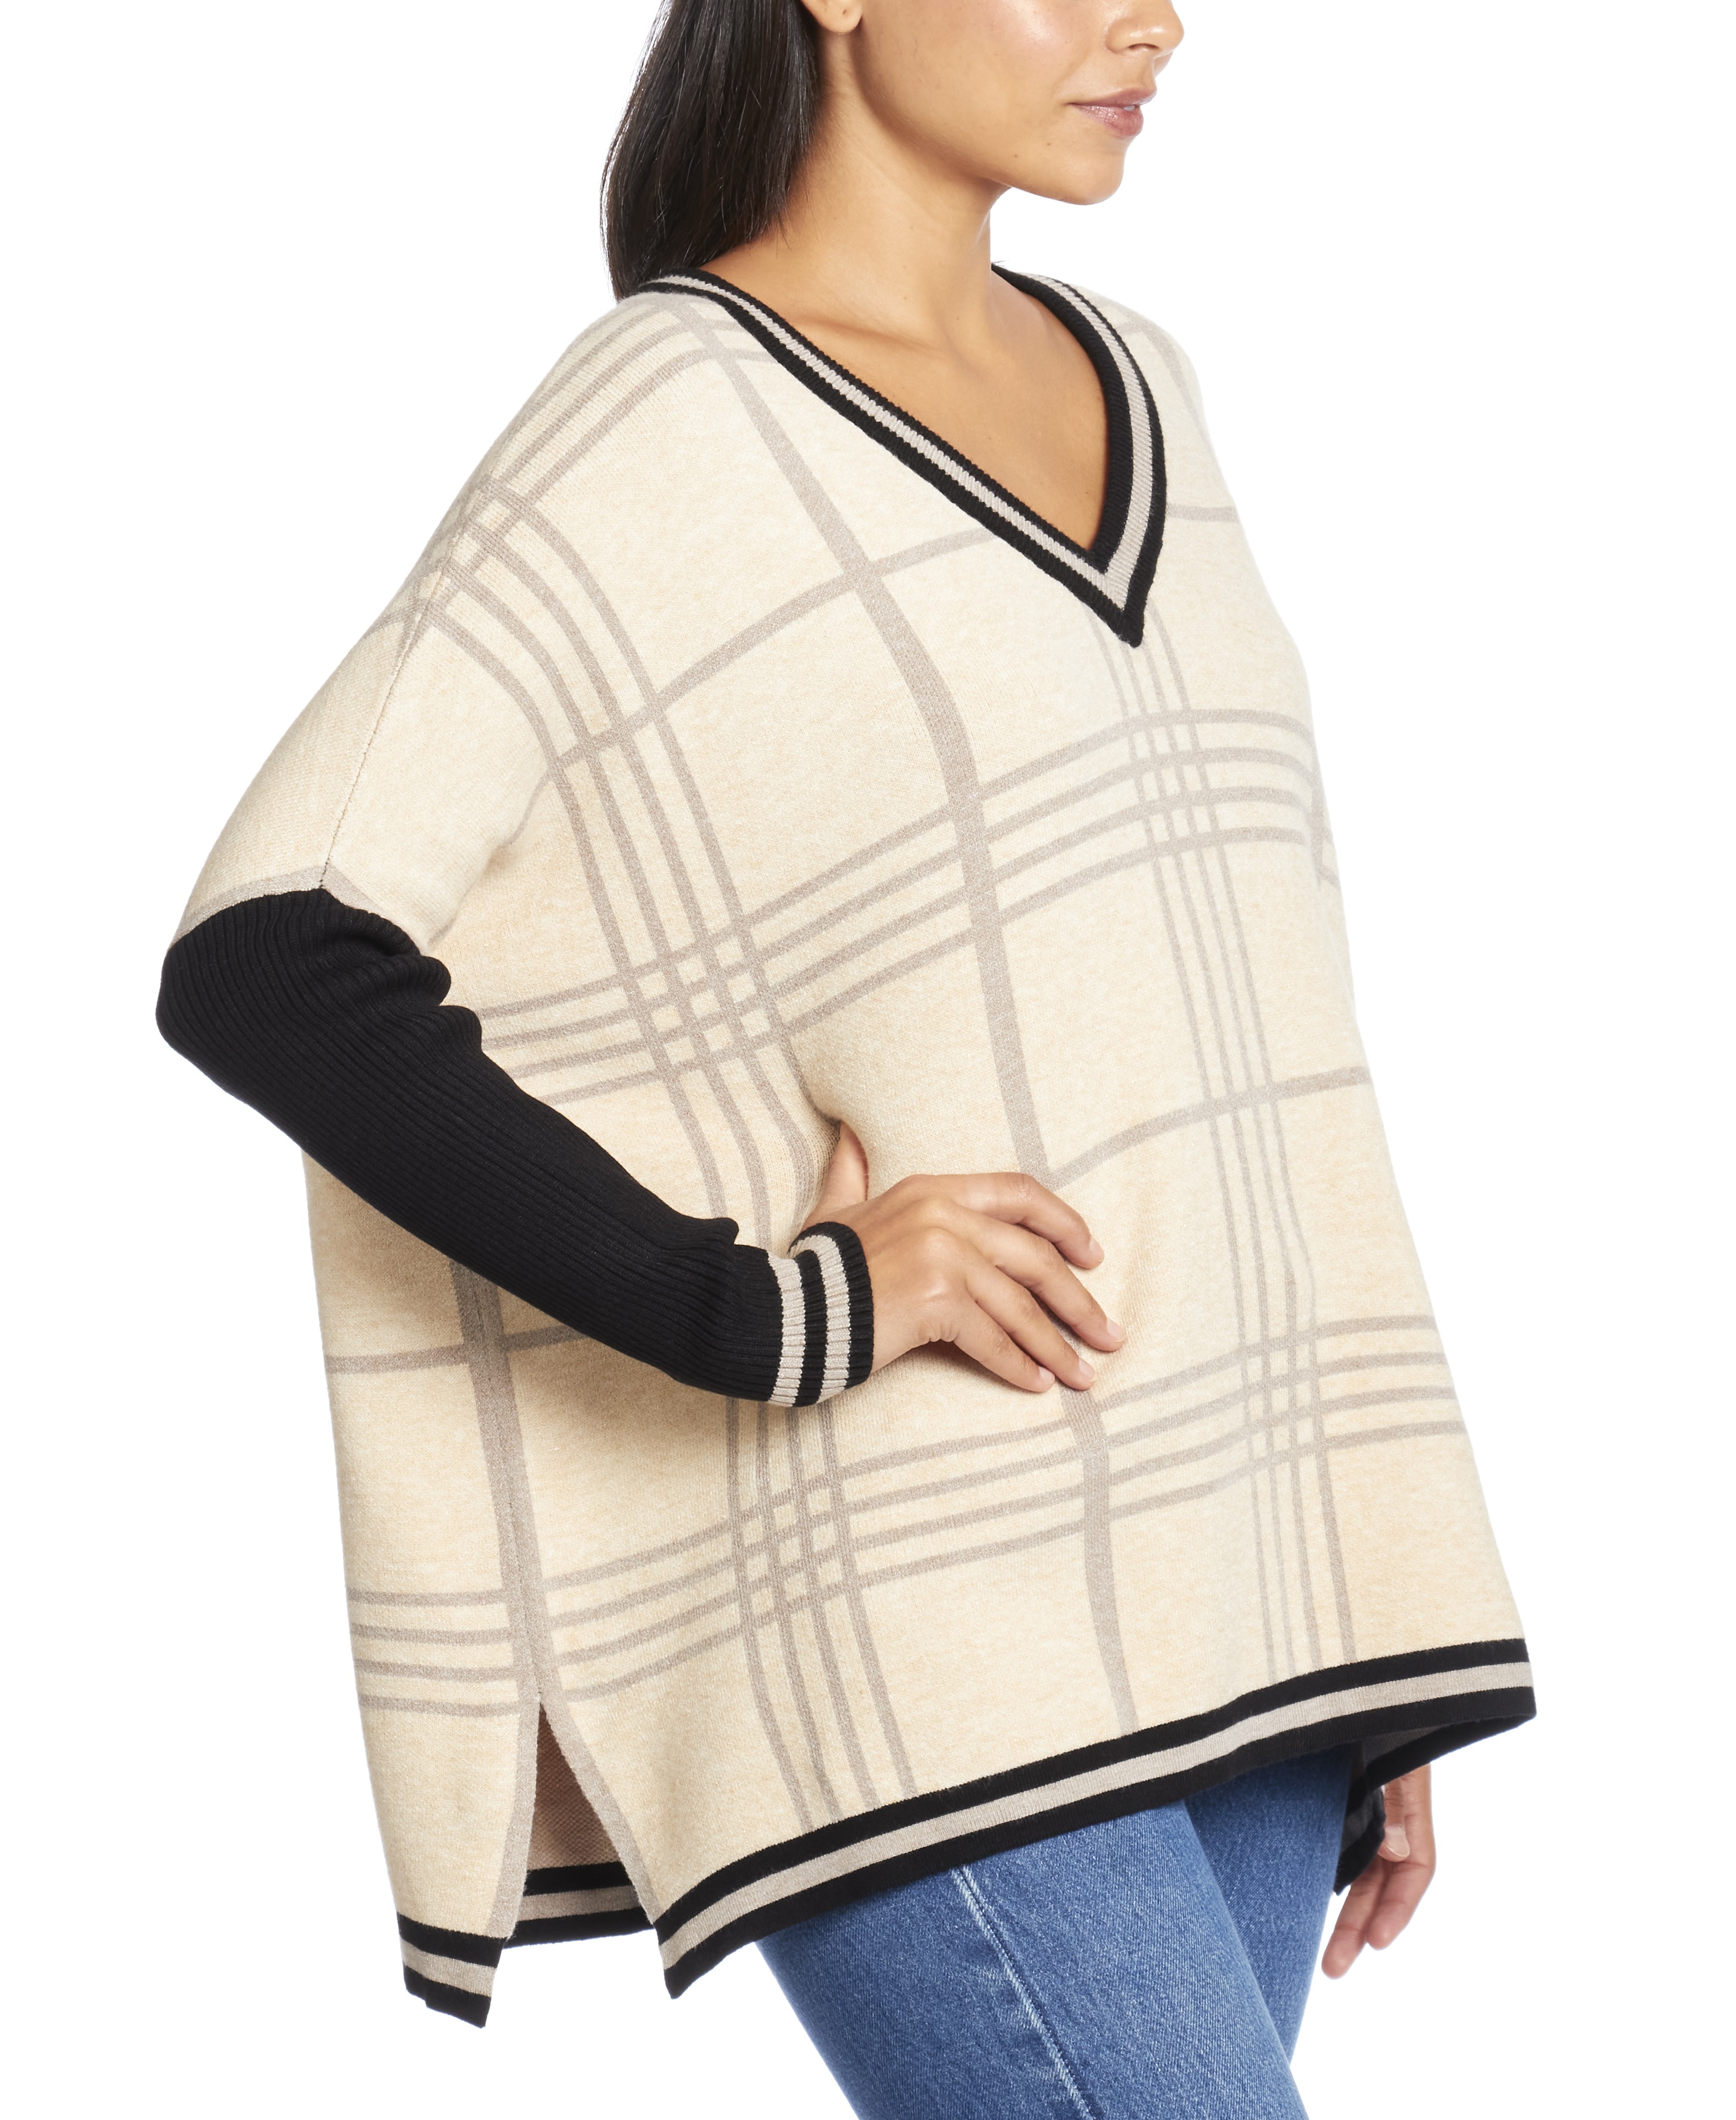 V-Neck Poncho Sweater in Winter Plaid